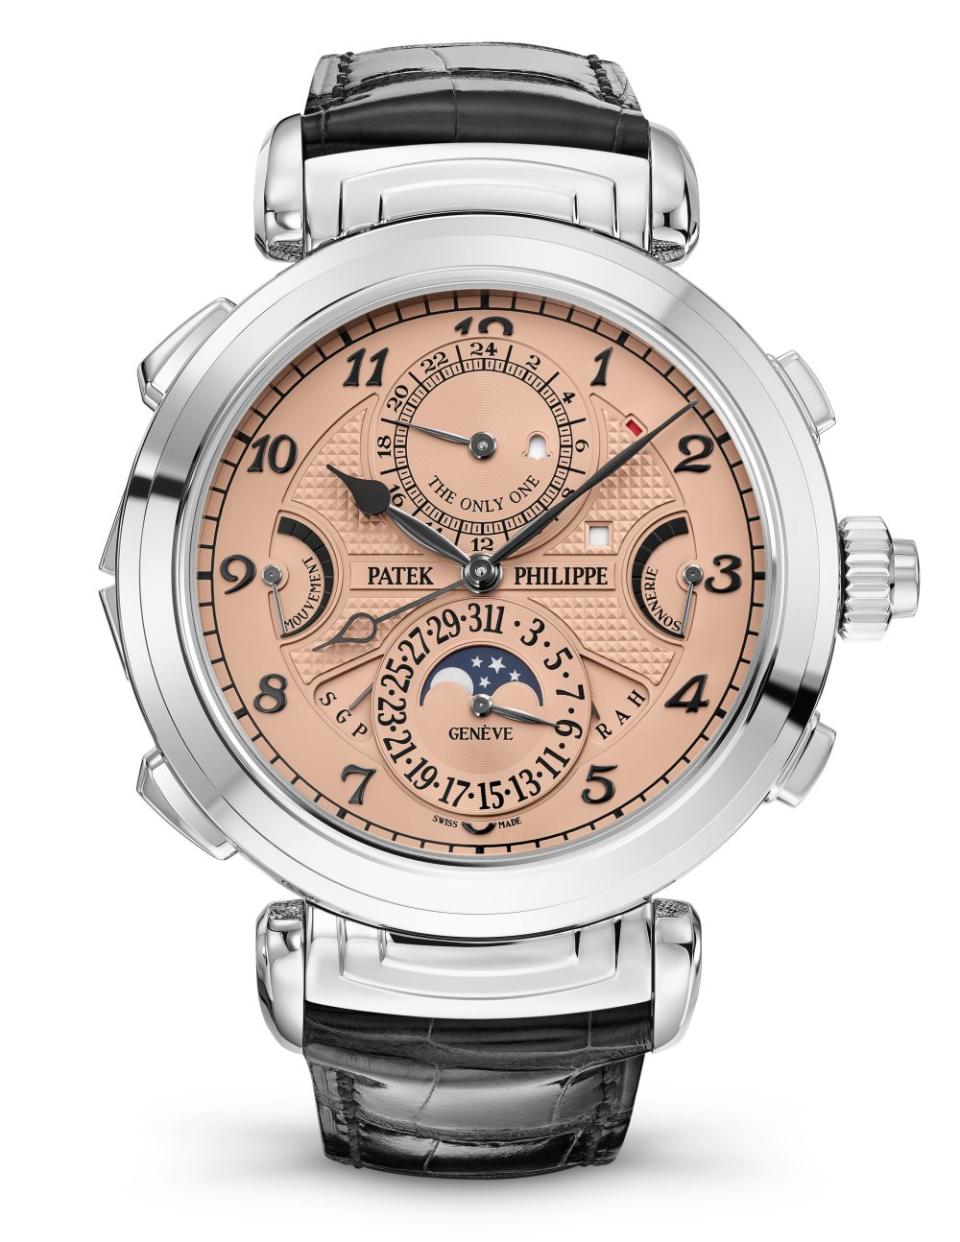 most expensive watches in the world, Patek Philippe, Patek Philippe Ref. 6300A-010 Grandmaster Chime, $31 million, Patek Philippe watch